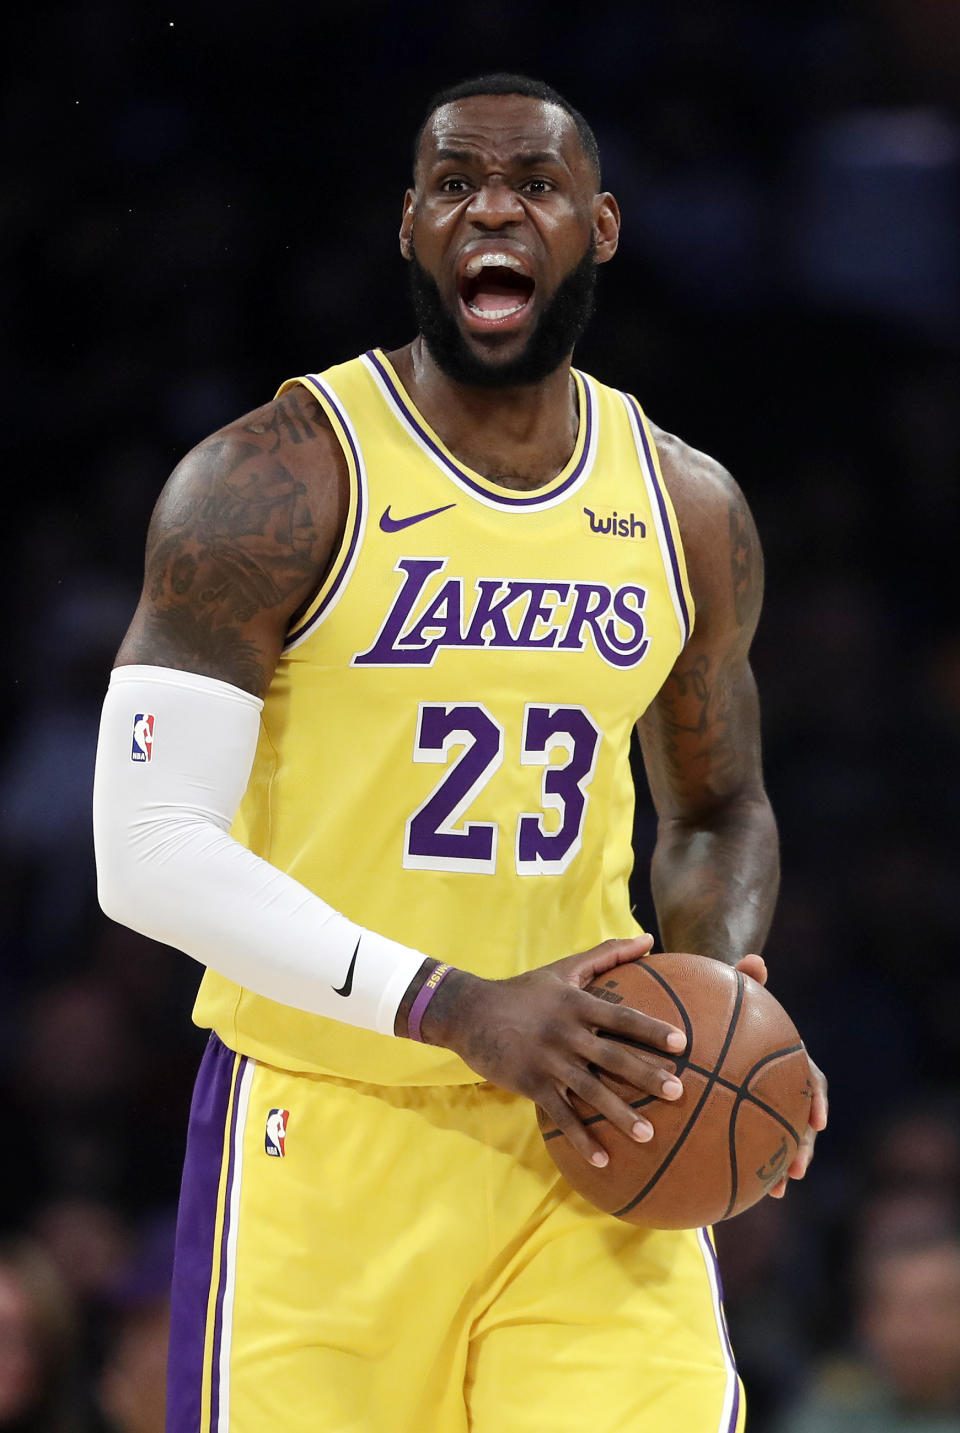 Los Angeles Lakers' LeBron James yells during the first half of the team's NBA basketball game against the Houston Rockets on Thursday, Feb. 21, 2019, in Los Angeles. (AP Photo/Marcio Jose Sanchez)